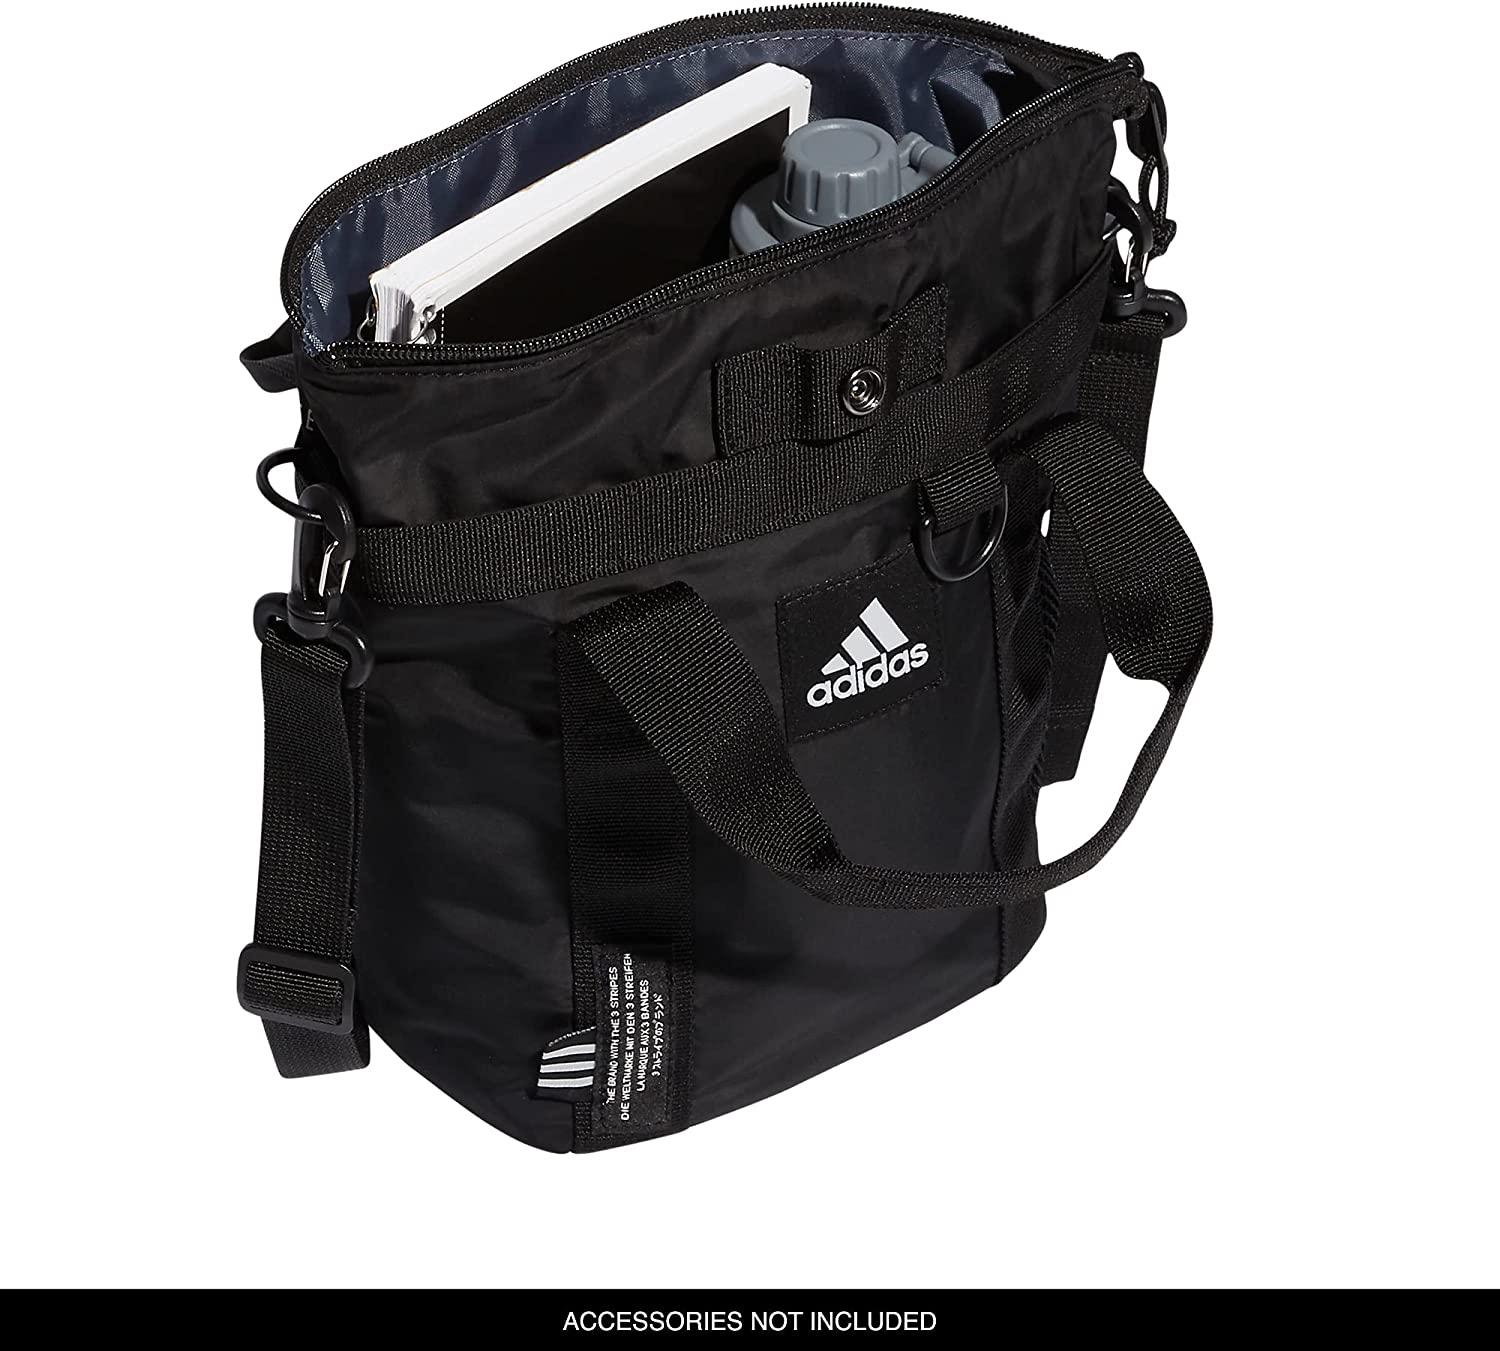  adidas Women's All Me Tote Bag, Black, One Size